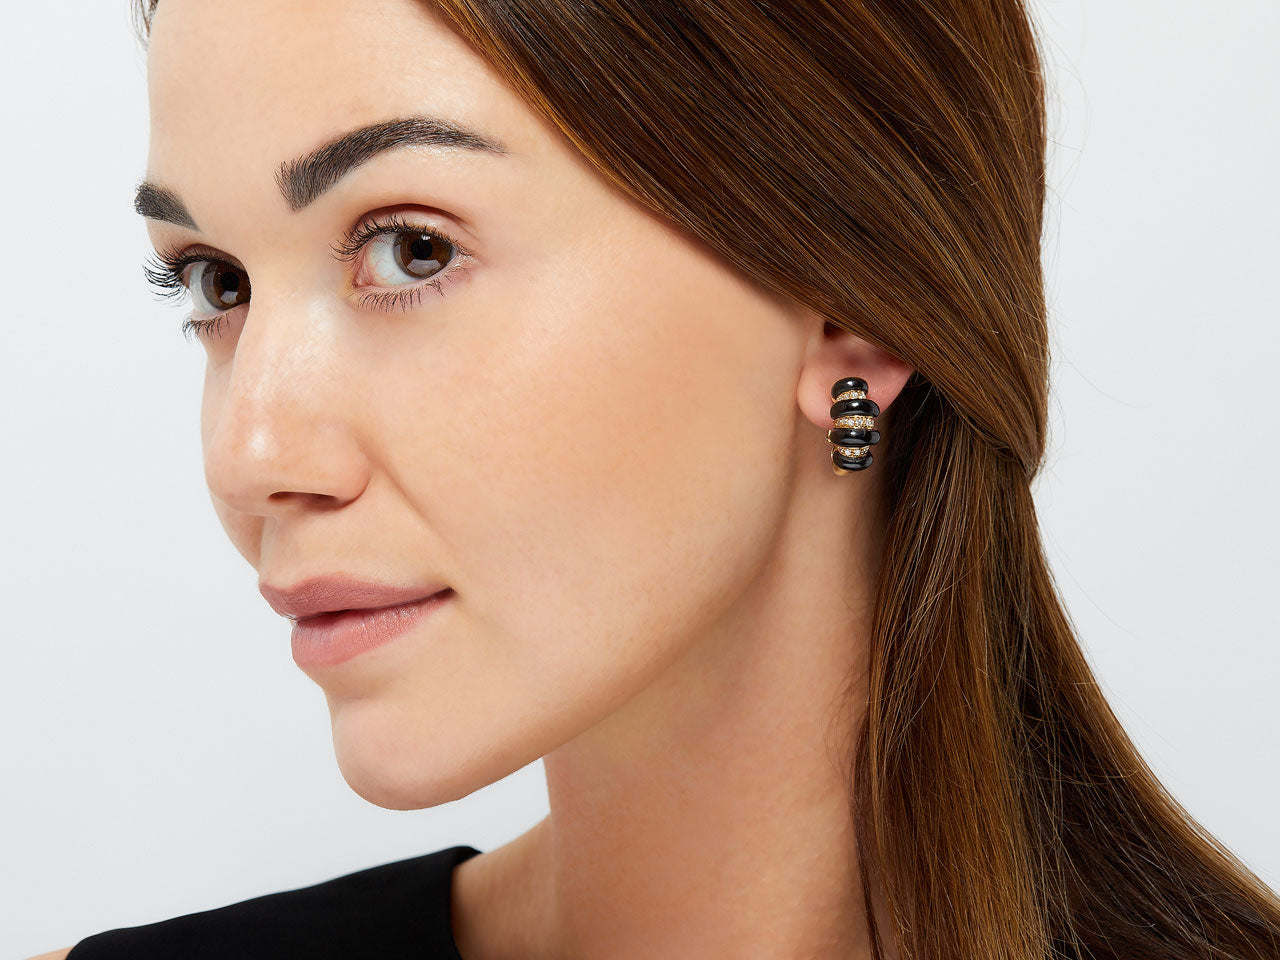 Onyx and Diamond Earclips in 18K Gold